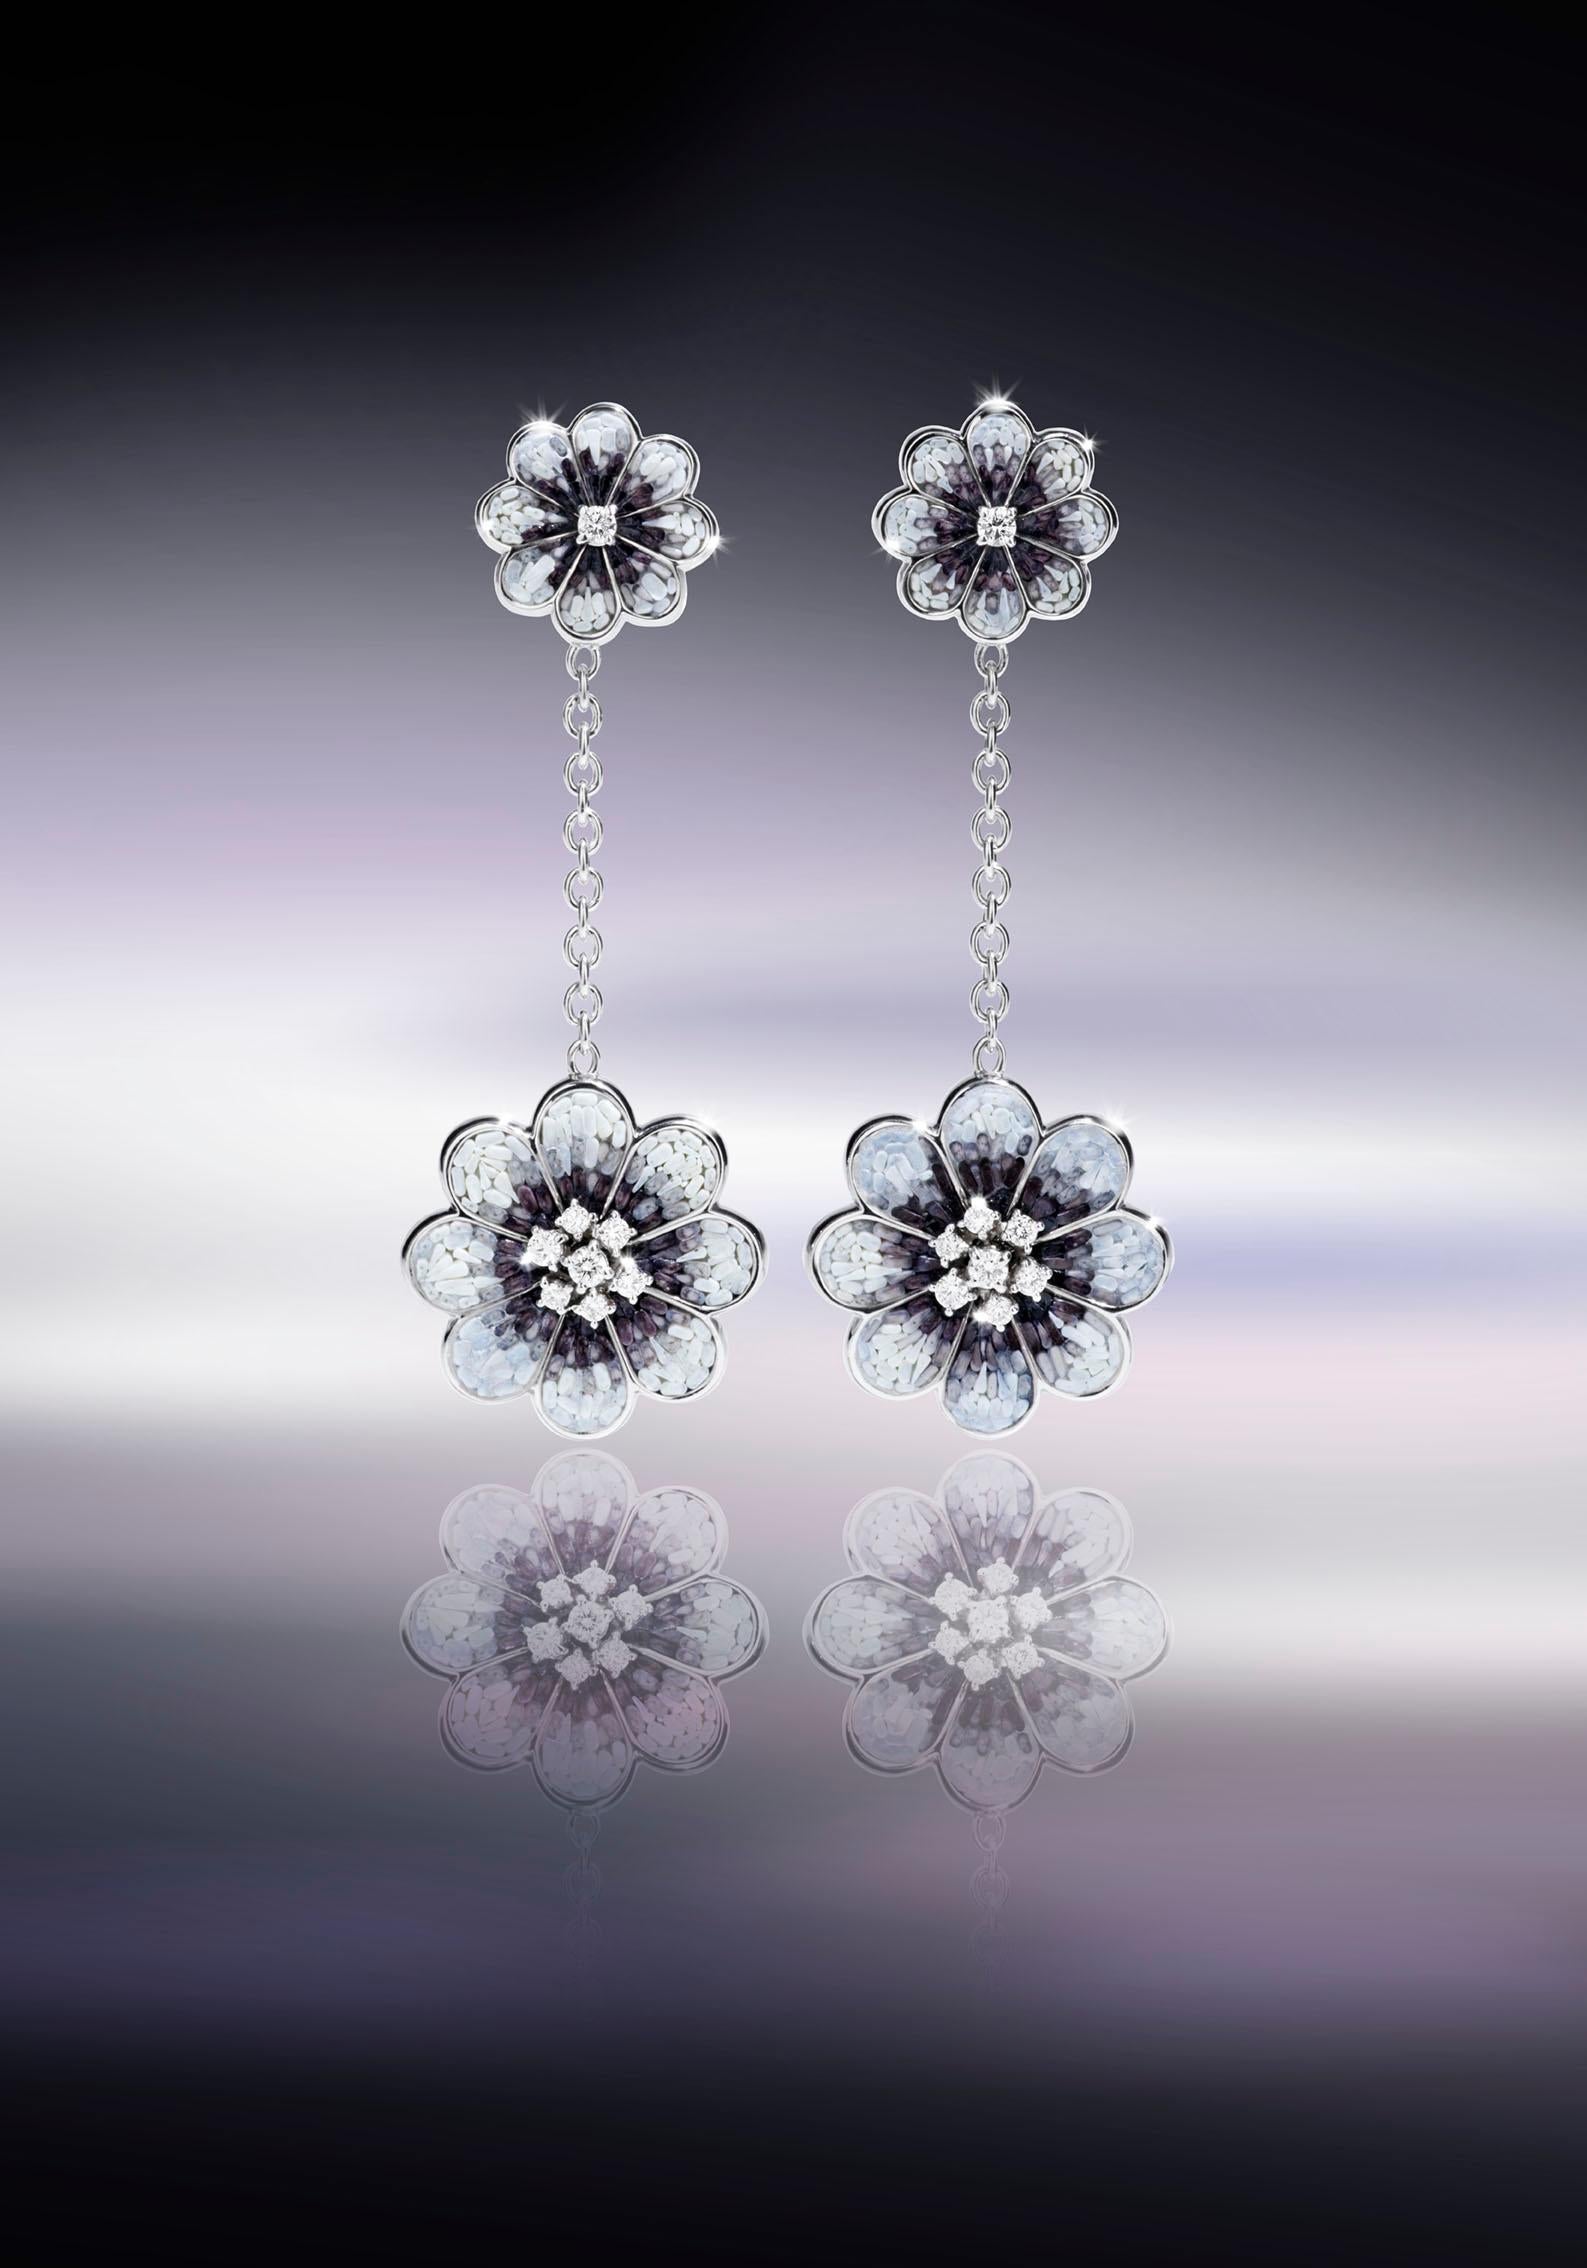 Brilliant Cut Stylish Earrings White Gold White Diamonds Hand Decoated with Micro Mosaic For Sale